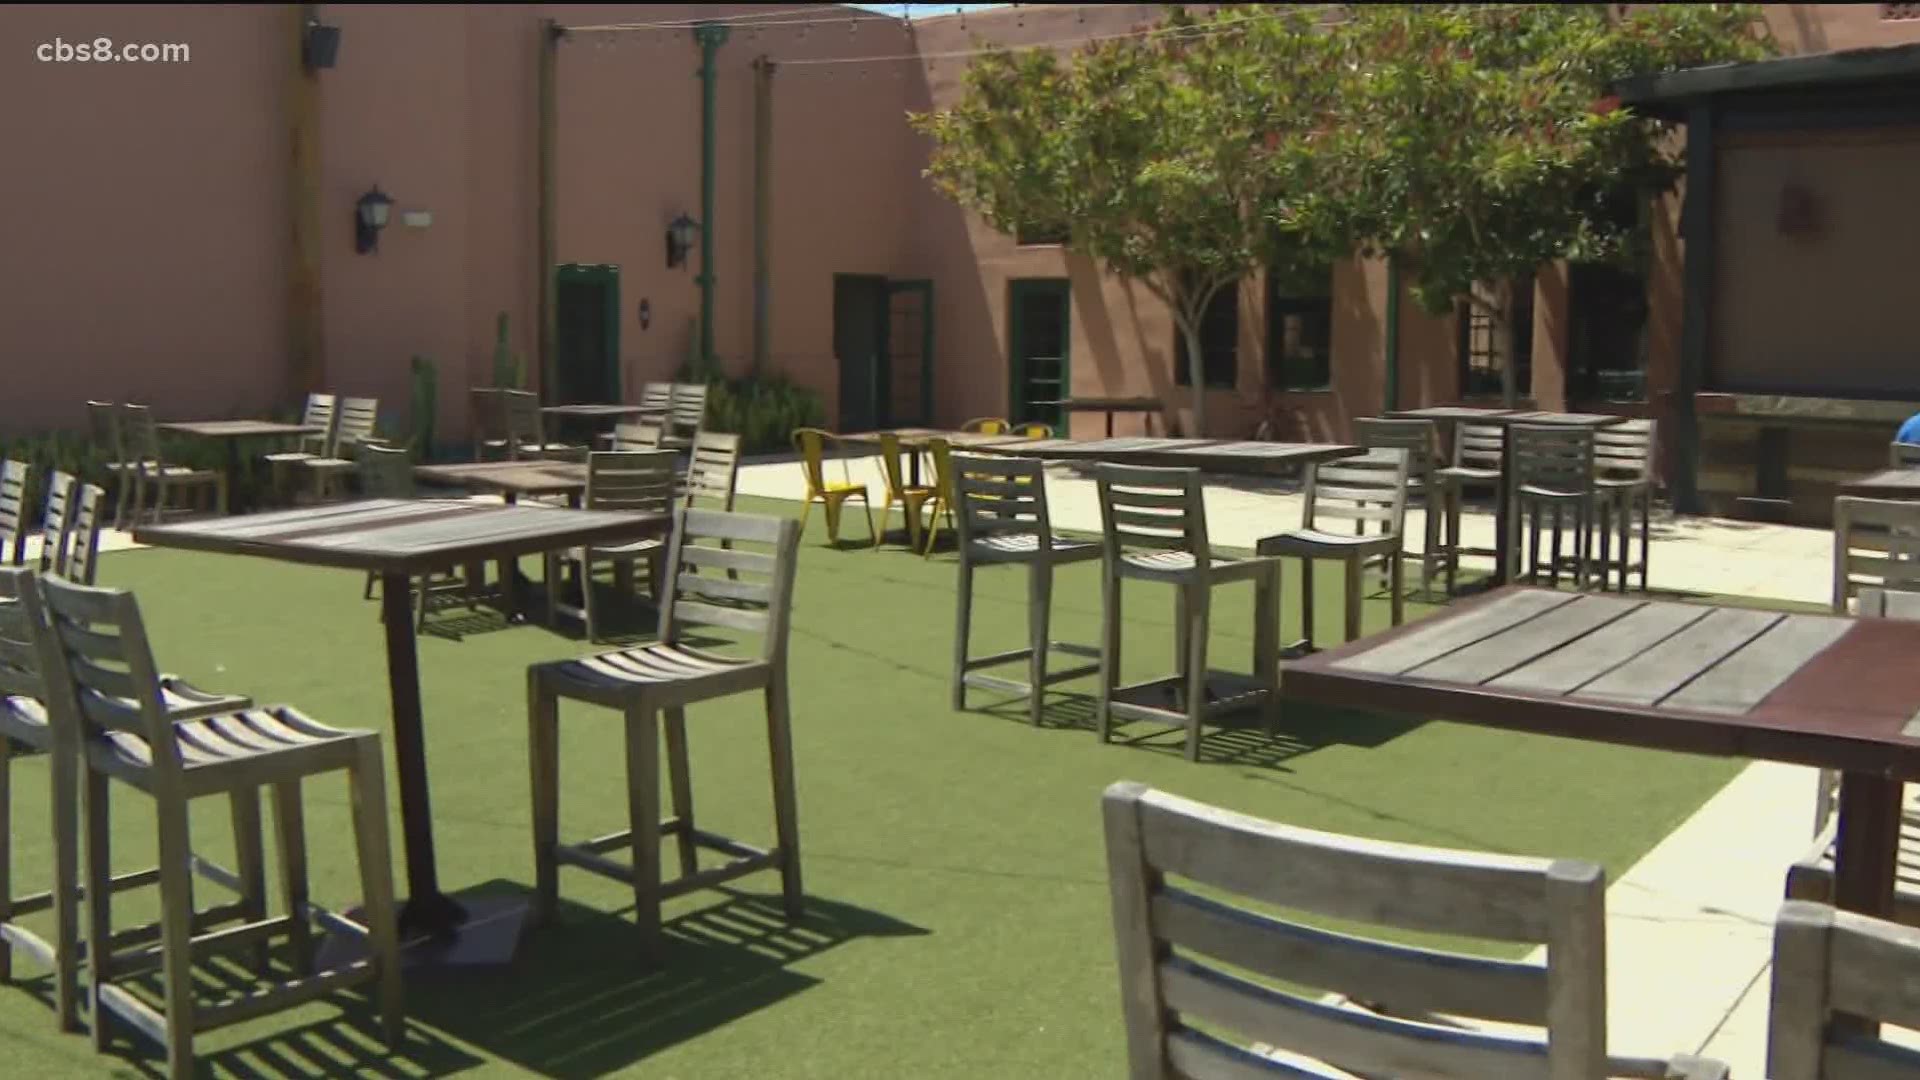 Stone Brewing at Liberty Station is allowing Breakfast Republic to use one of their courtyards for outdoor dining